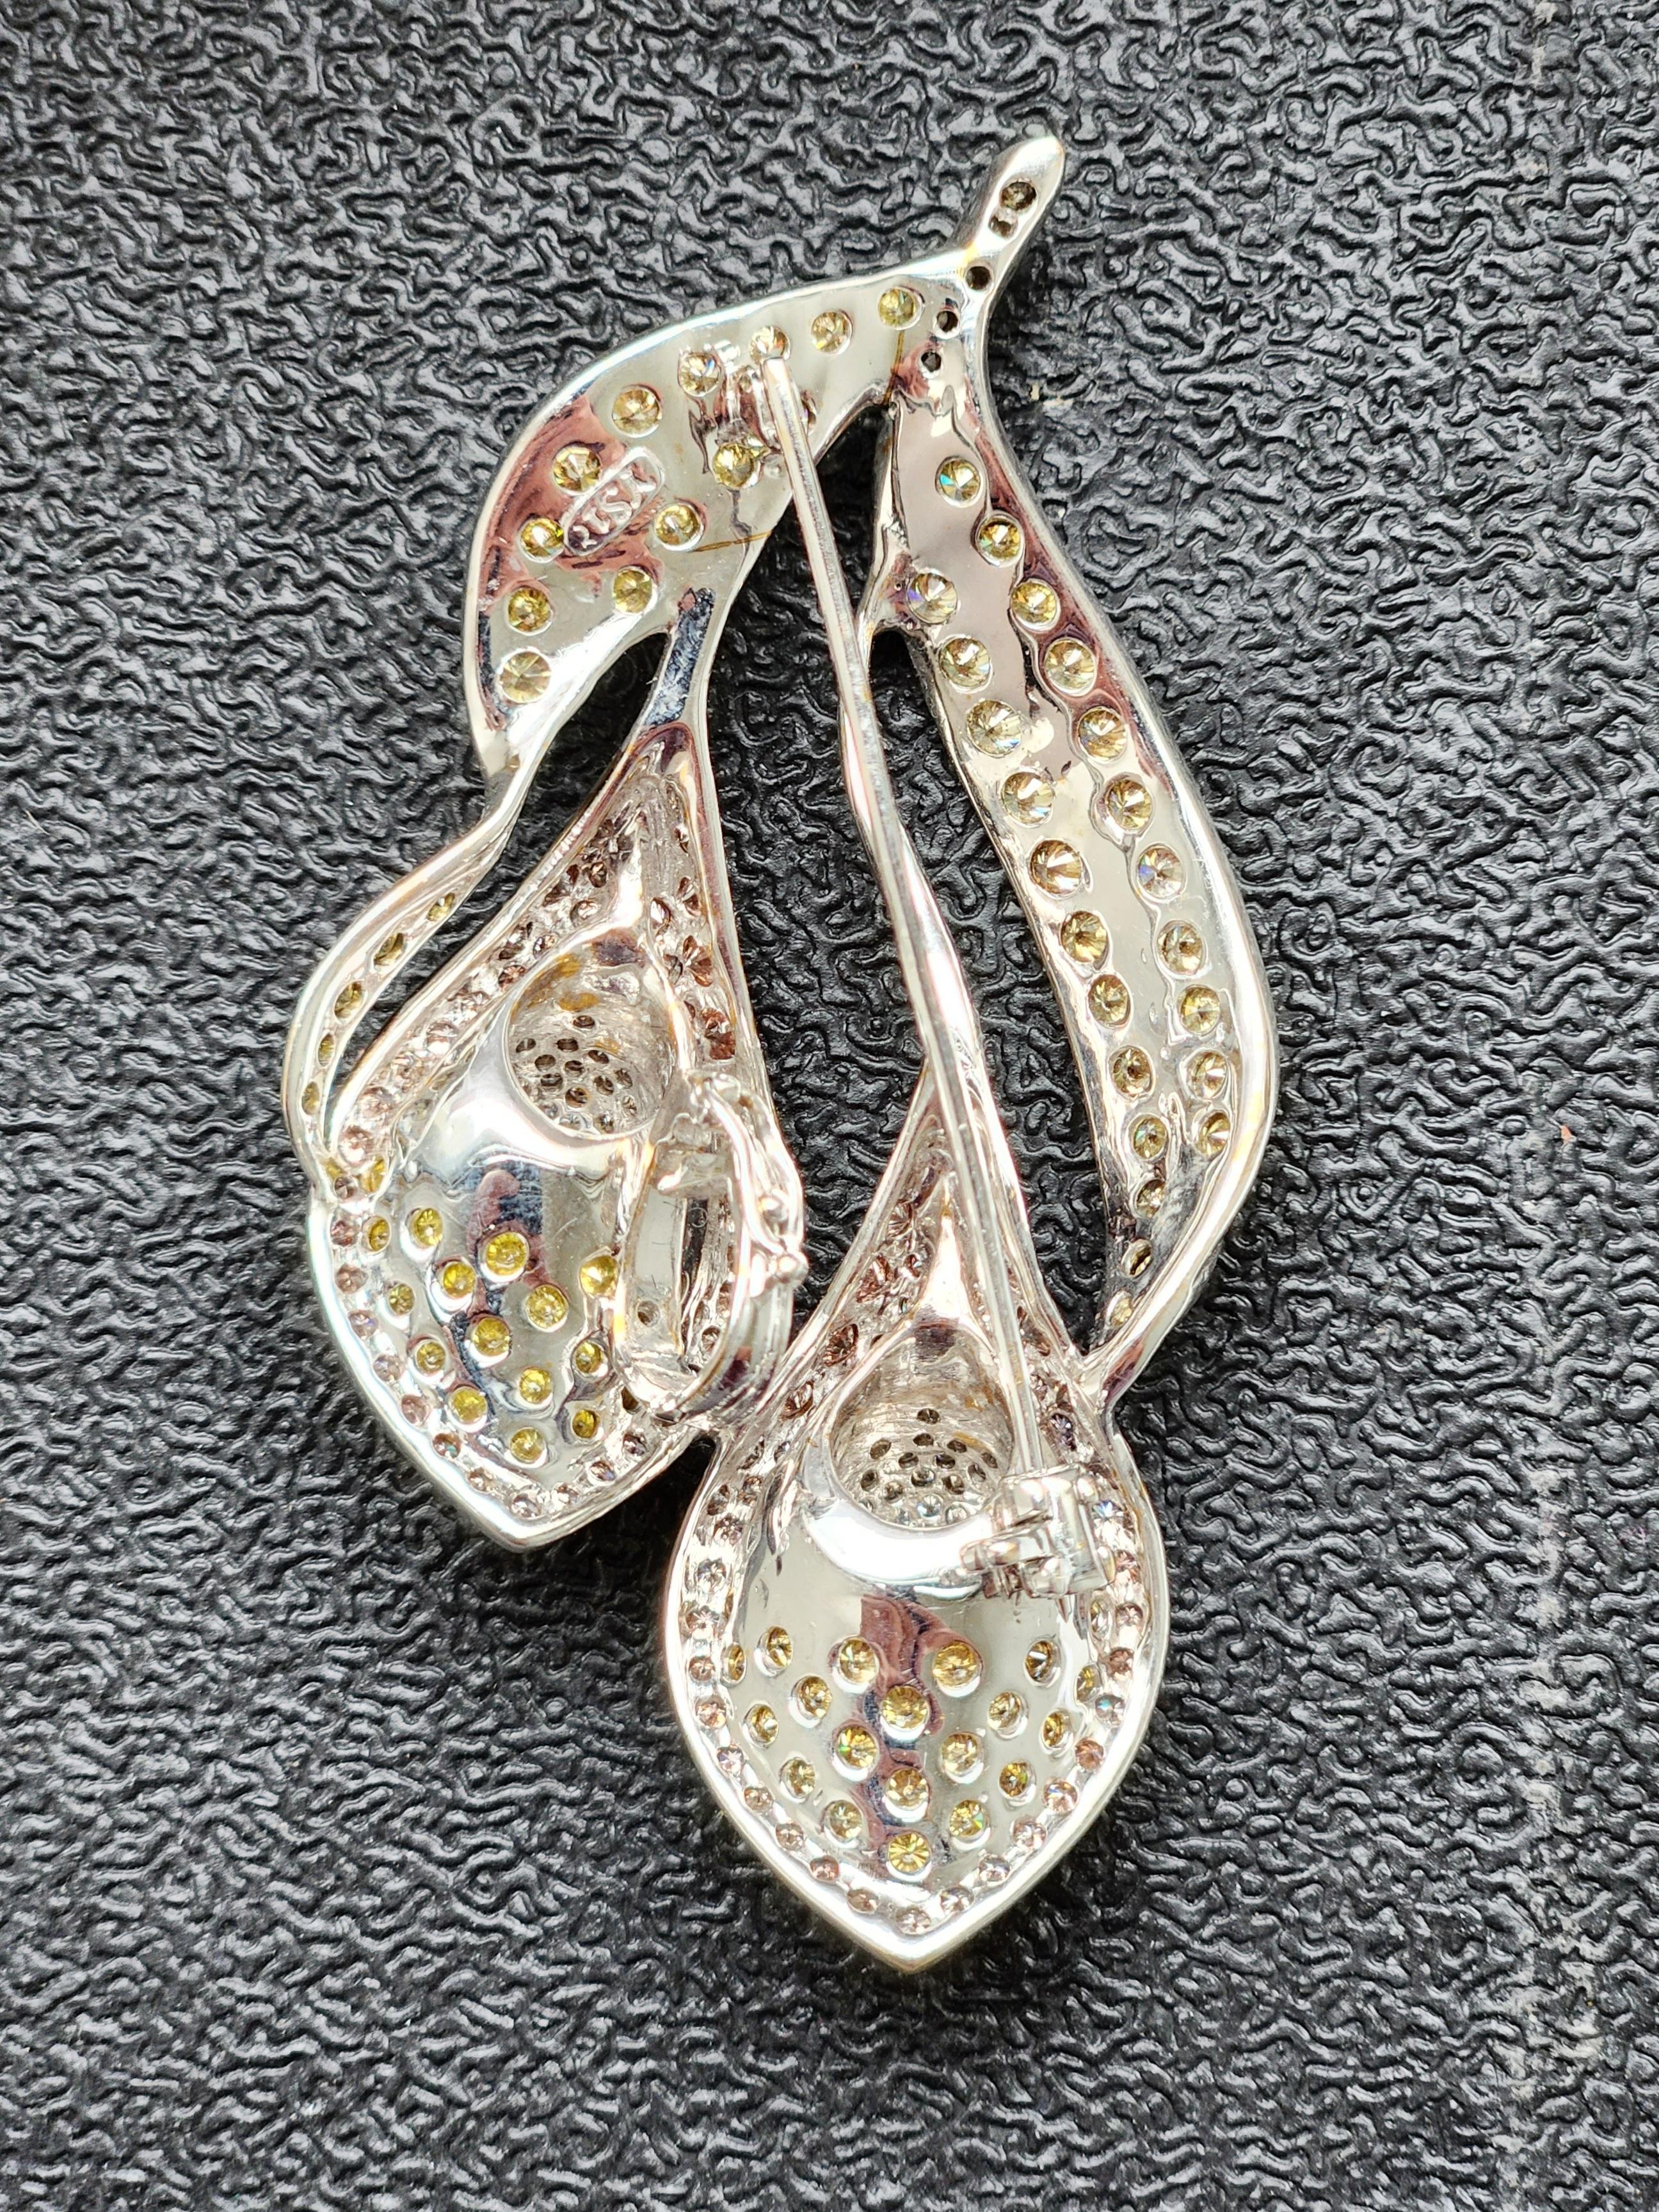 The Tulip Shaped Multicolor Diamond Brooch Pendant is a stunning piece of jewelry that boasts exquisite artistry and craftsmanship. This beautiful brooch pendant features a centerpiece of white melee diamonds surrounded by yellow melee diamonds in